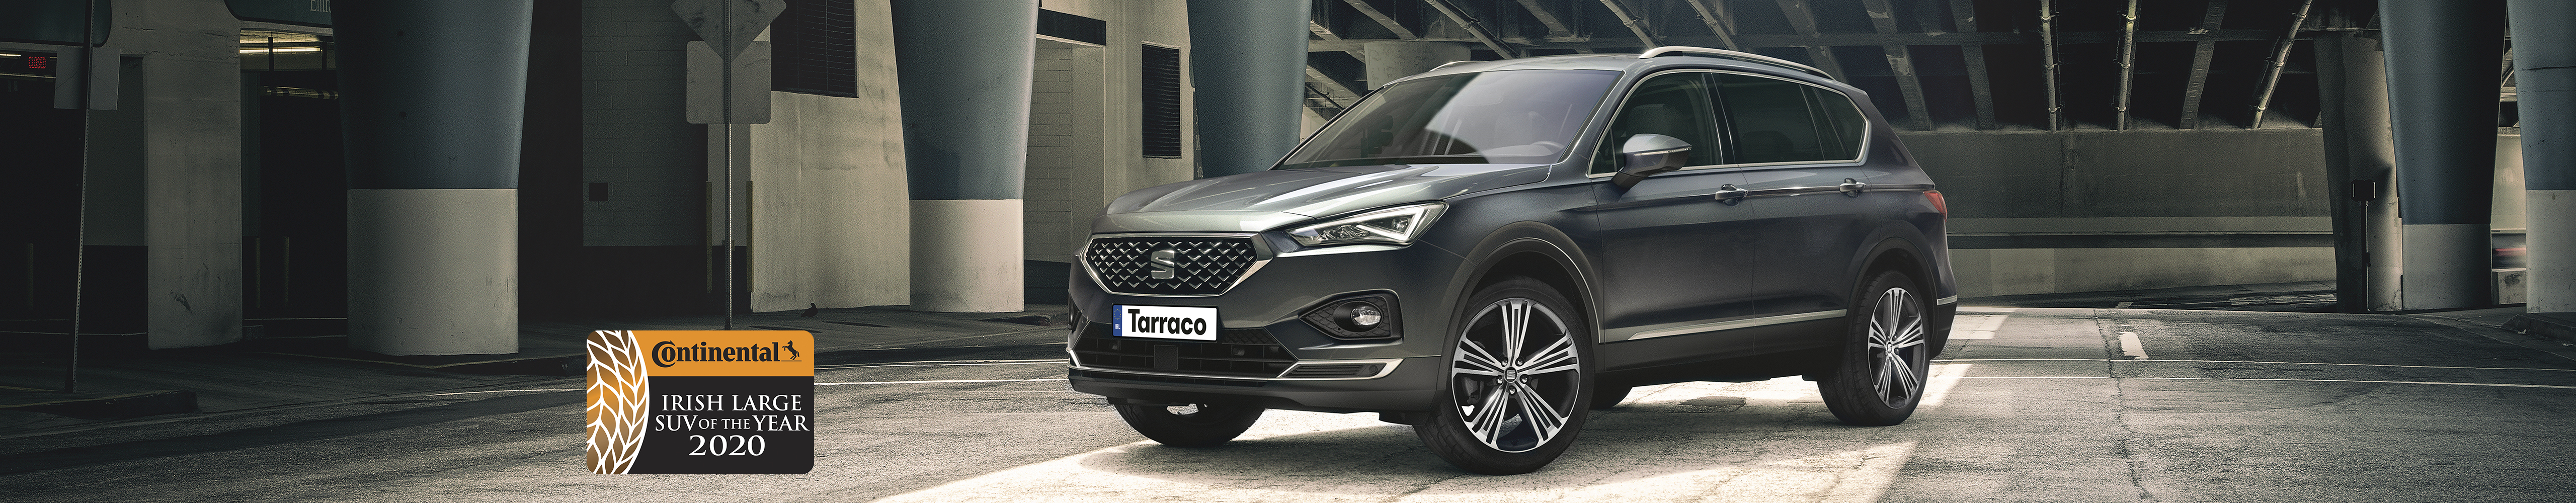 SEAT Tarraco SUV 7 seater parked outside building beauty shot